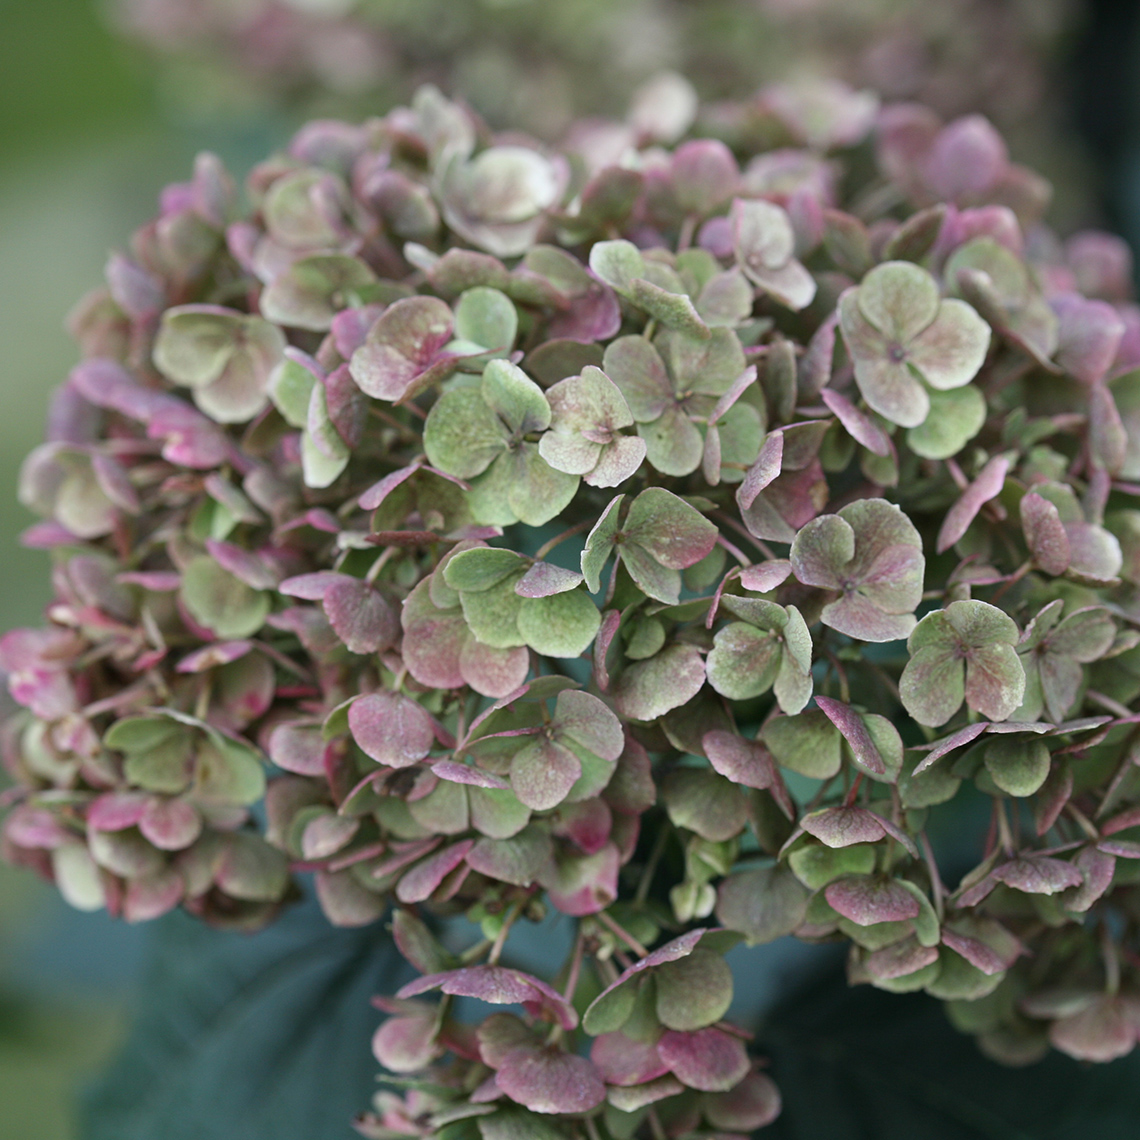 A bloom on Invincibelle Mini Mauvette hydrangea that is aging to a mix of mauve and deep green which sounds kind of awful but is actually quite pretty